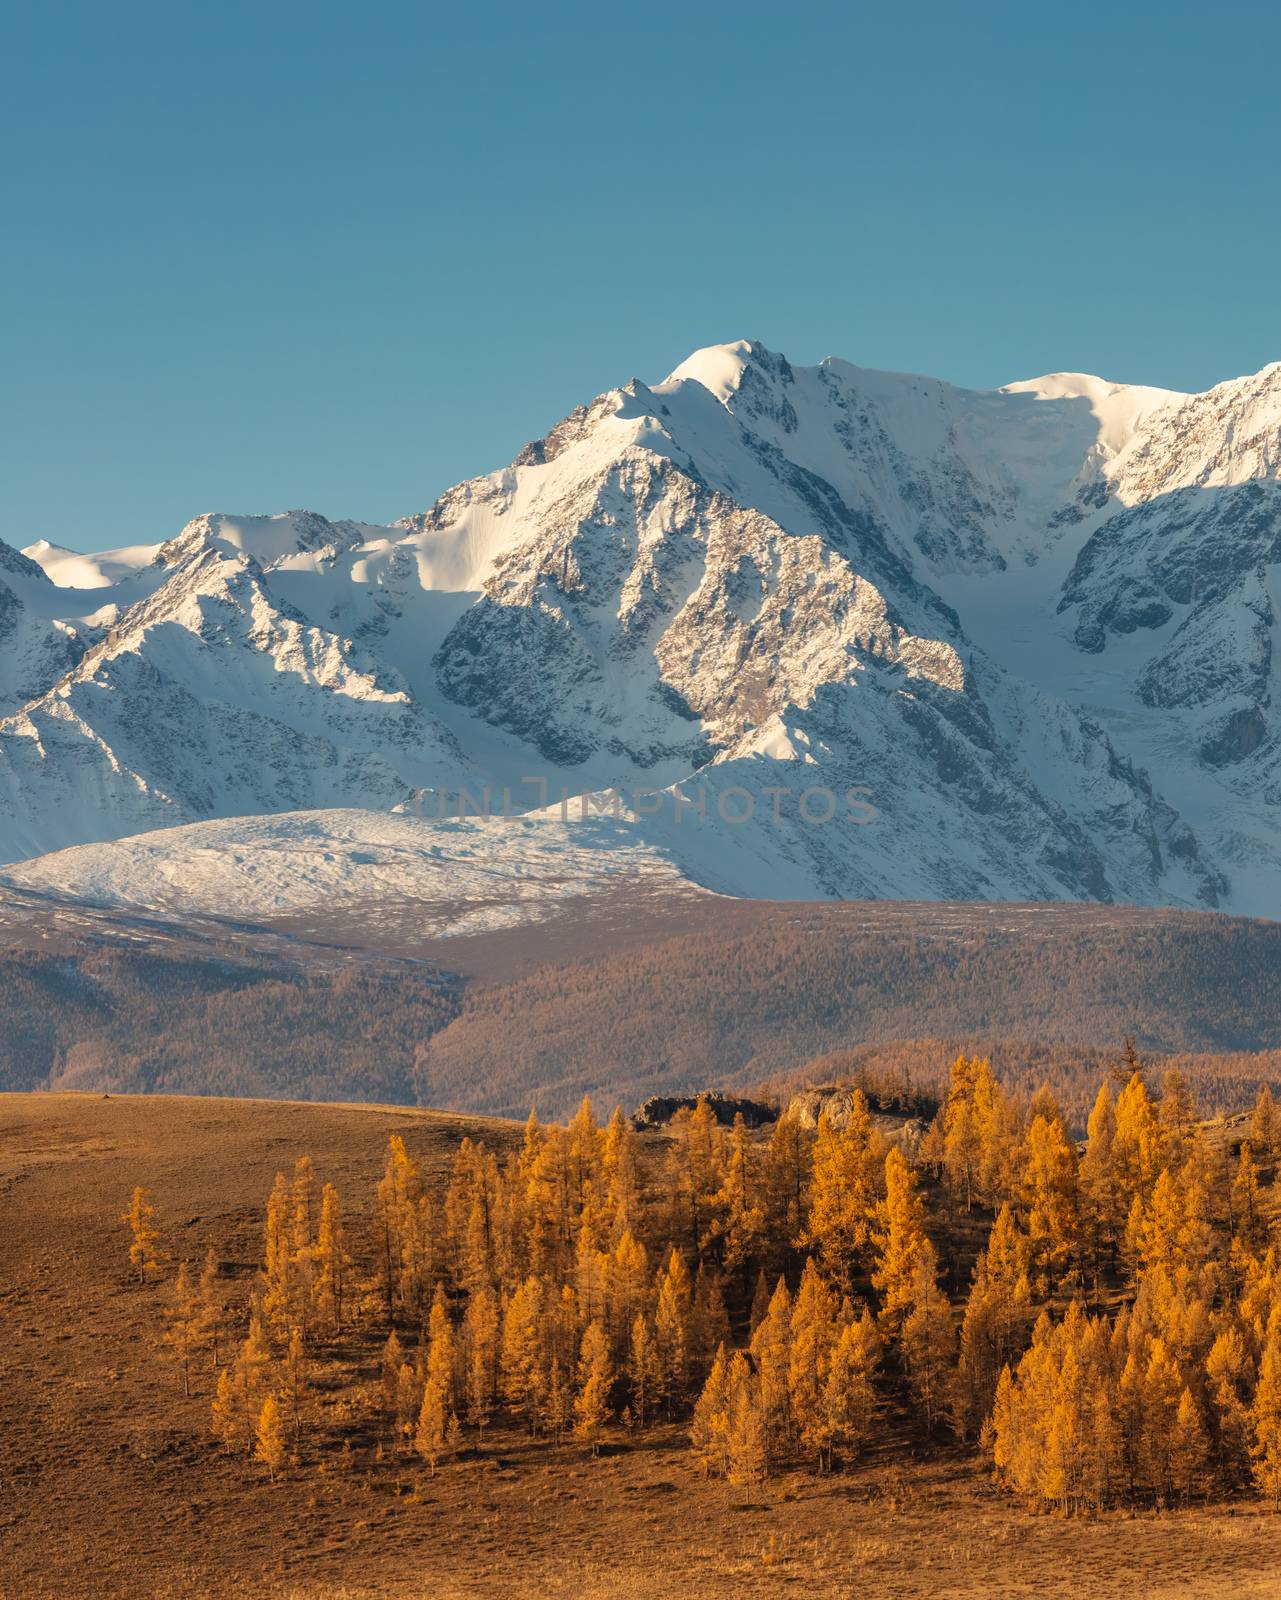 Beautiful portrait size shot of a white snowy mountain and hills with trees in the foreground. Blue sky as a background. Fall time. Sunrise. Golden hour. Altai mountains, Russia by DamantisZ